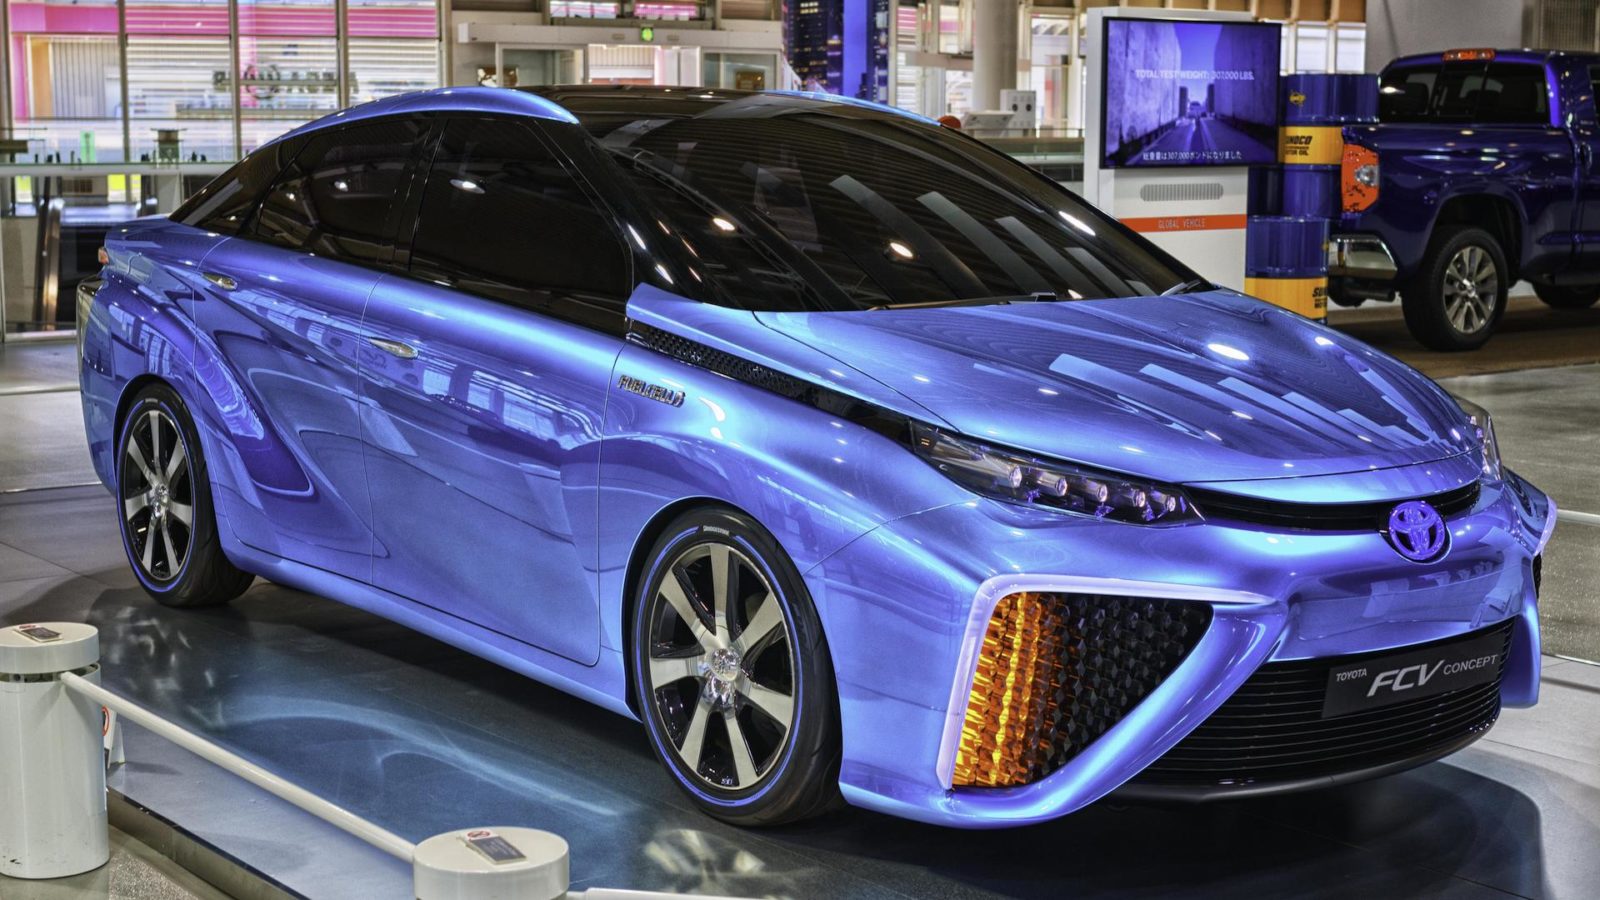 Driving the Toyota Mirai: My Hydrogen Fuel Cell Car Experience